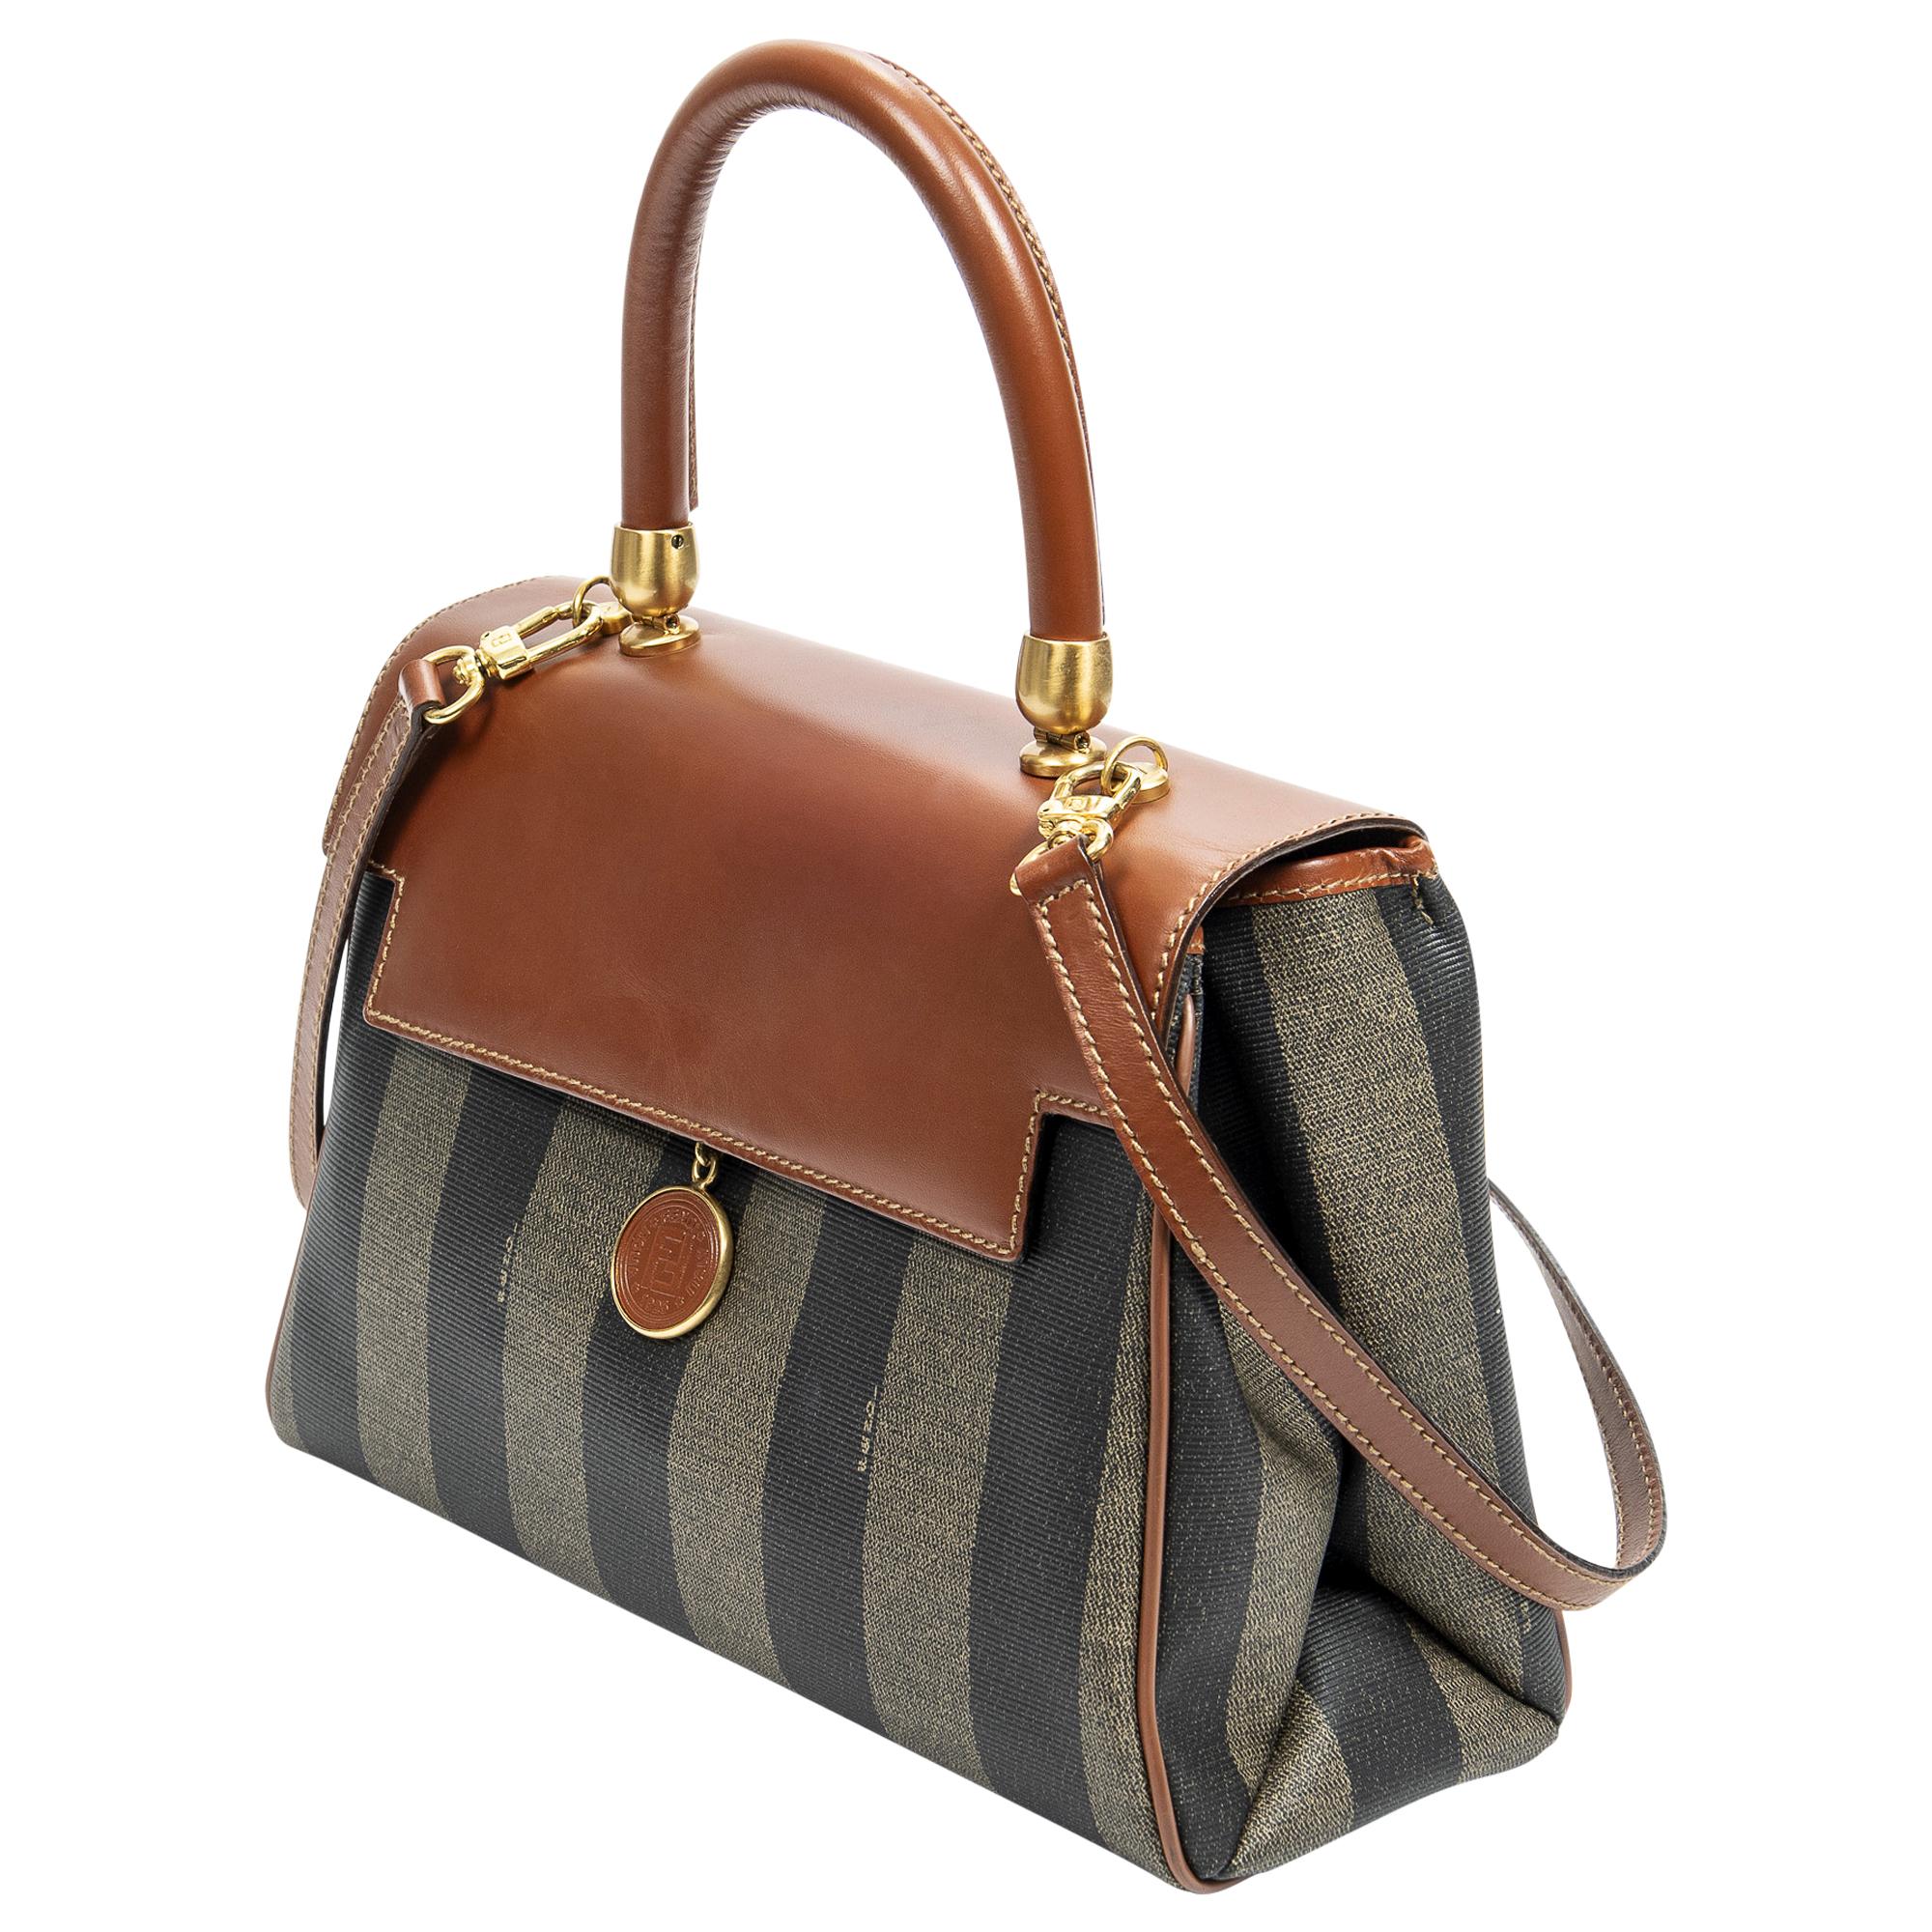 Introducing the Fendi Brown Vintage Pequin Top Handle Bag, a timeless piece for the discerning fashion aficionado. Crafted in durable brown coated canvas, this bag boasts an elegant gold clasp closure that adds a touch of luxury. The sturdy top